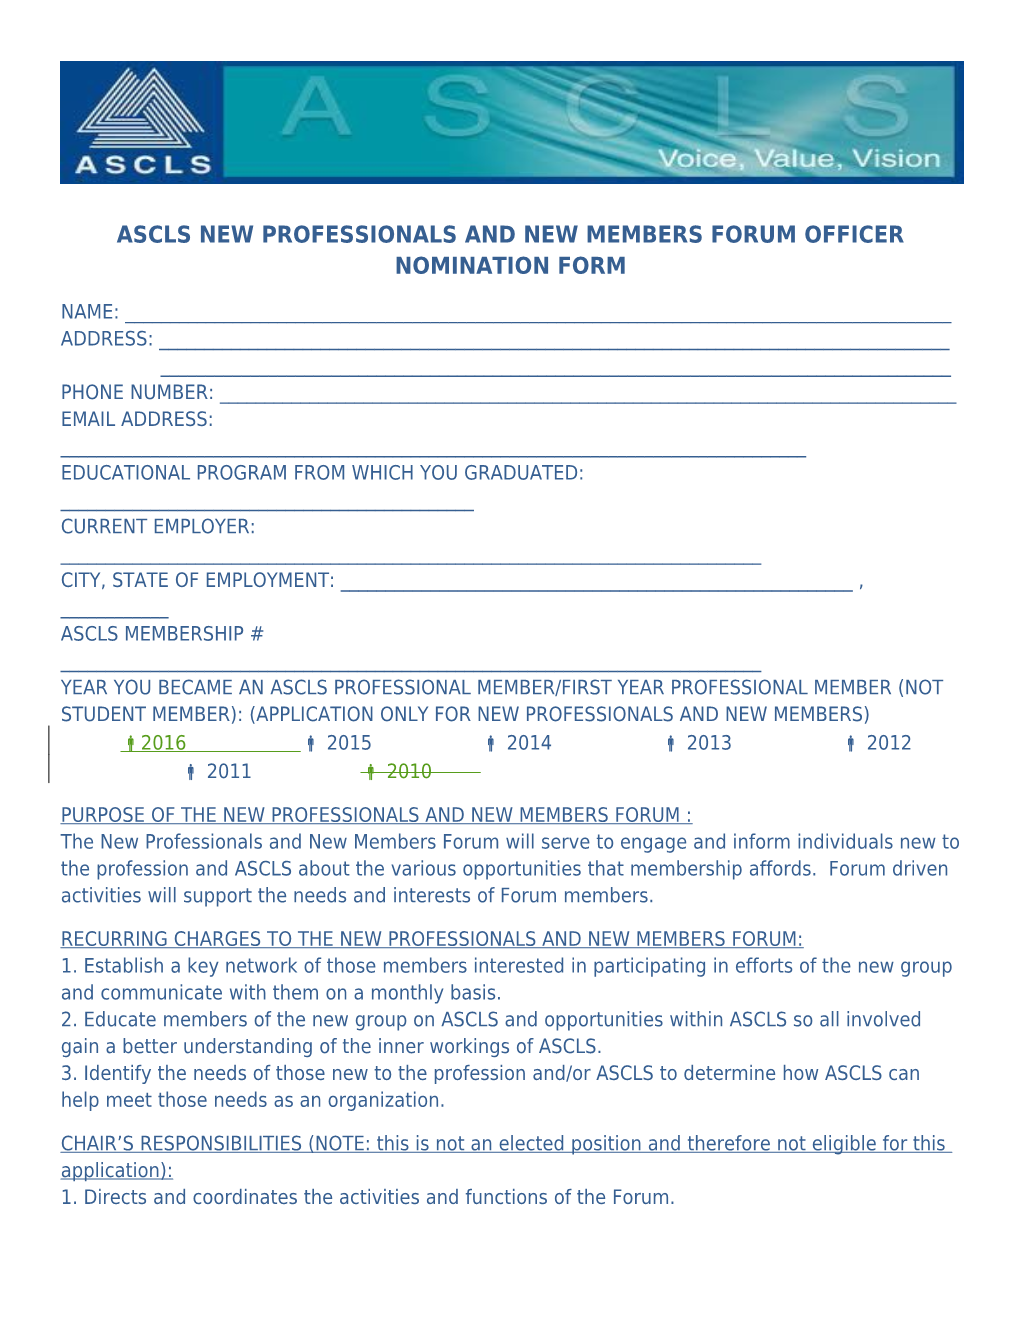 Ascls New Professionals and New Members Forum Officer Nomination Form